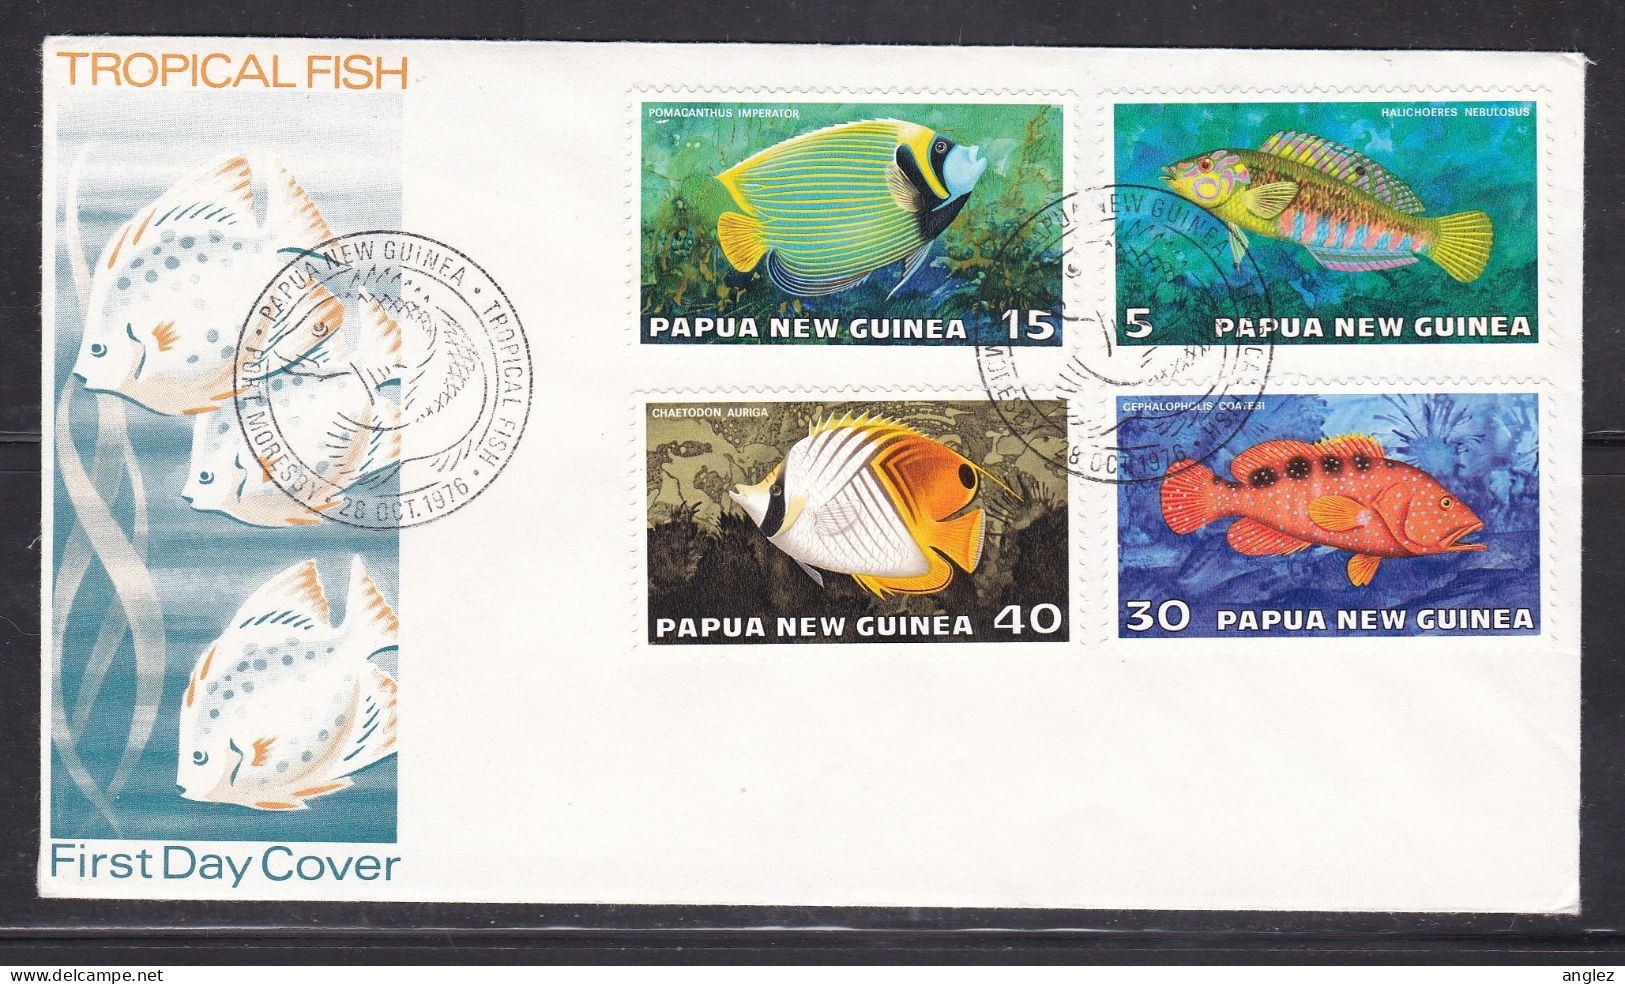 Papua New Guinea - 1976 Tropical Fish Illustrated FDC - Pictorial Postmark - Papua New Guinea